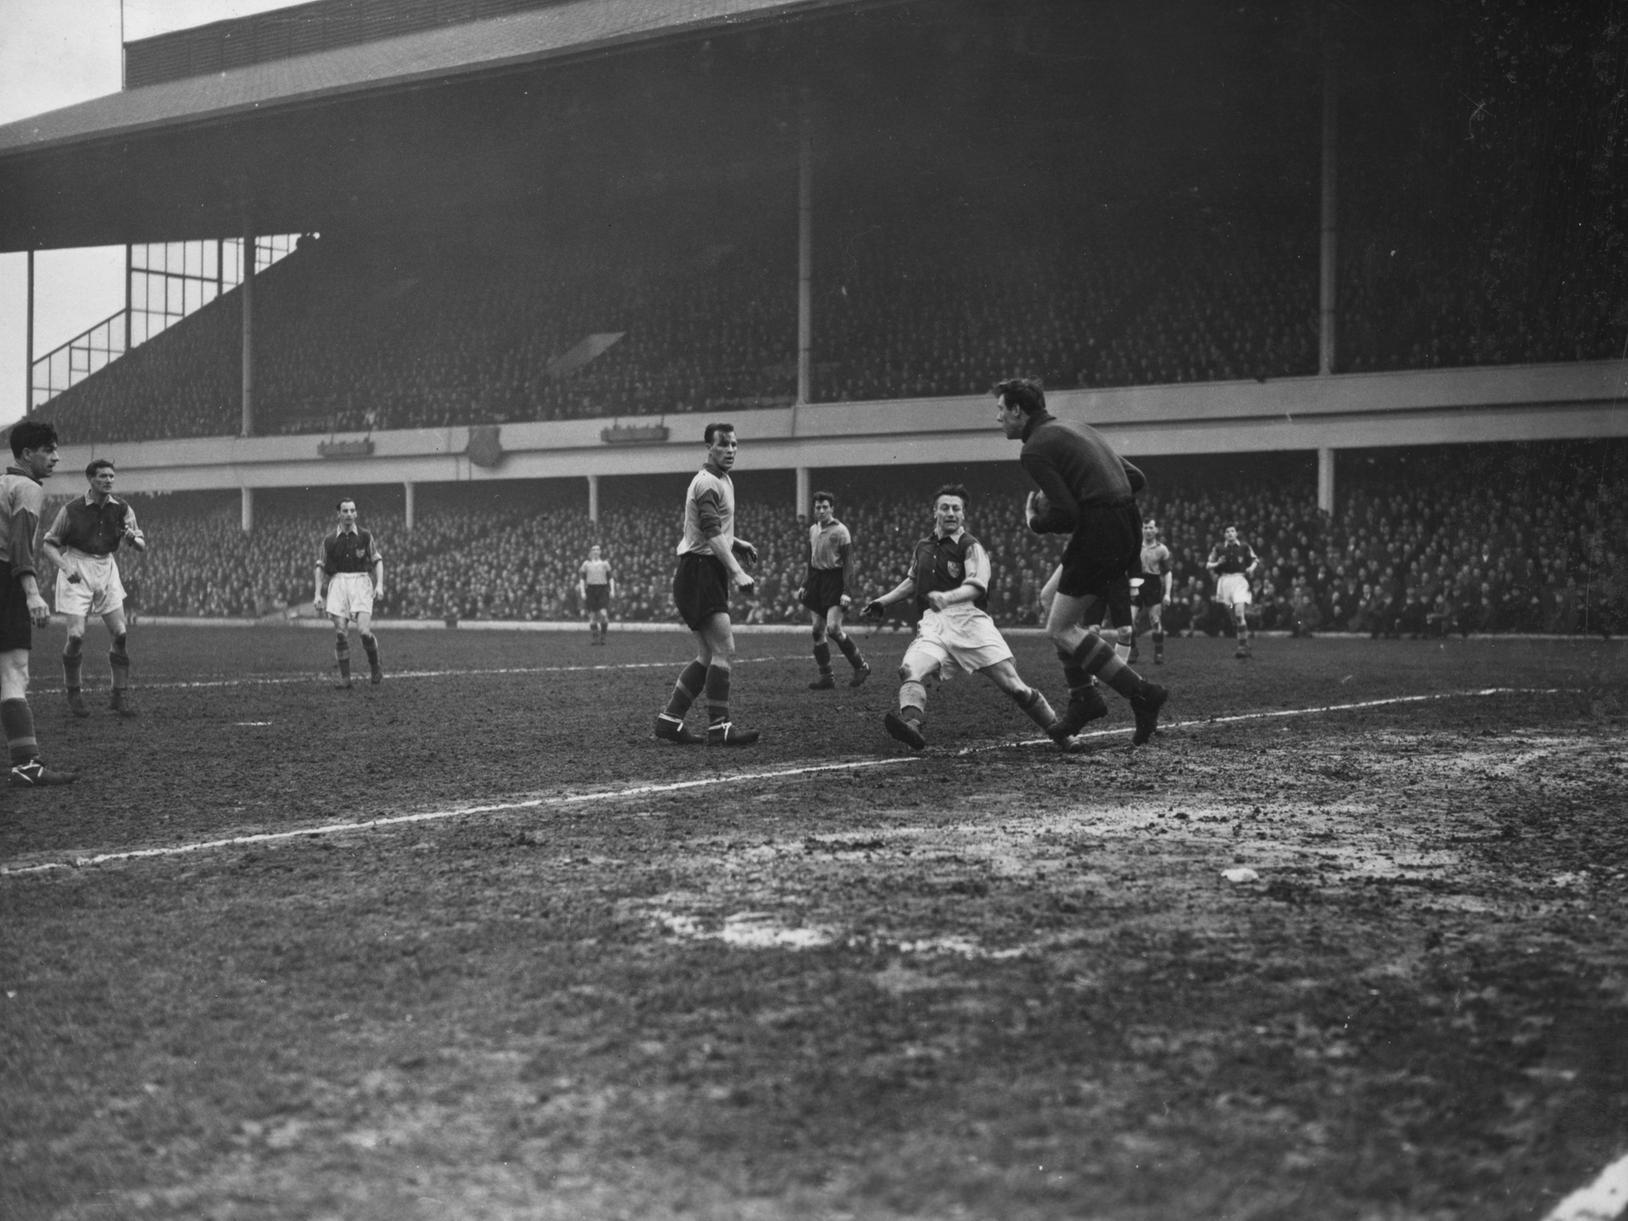 Leeds defender, Charles, watches his goalkeeper, Wood, take the ball ahead of West Ham United player, Dare, as West Ham United play Leeds United at Upton Park.